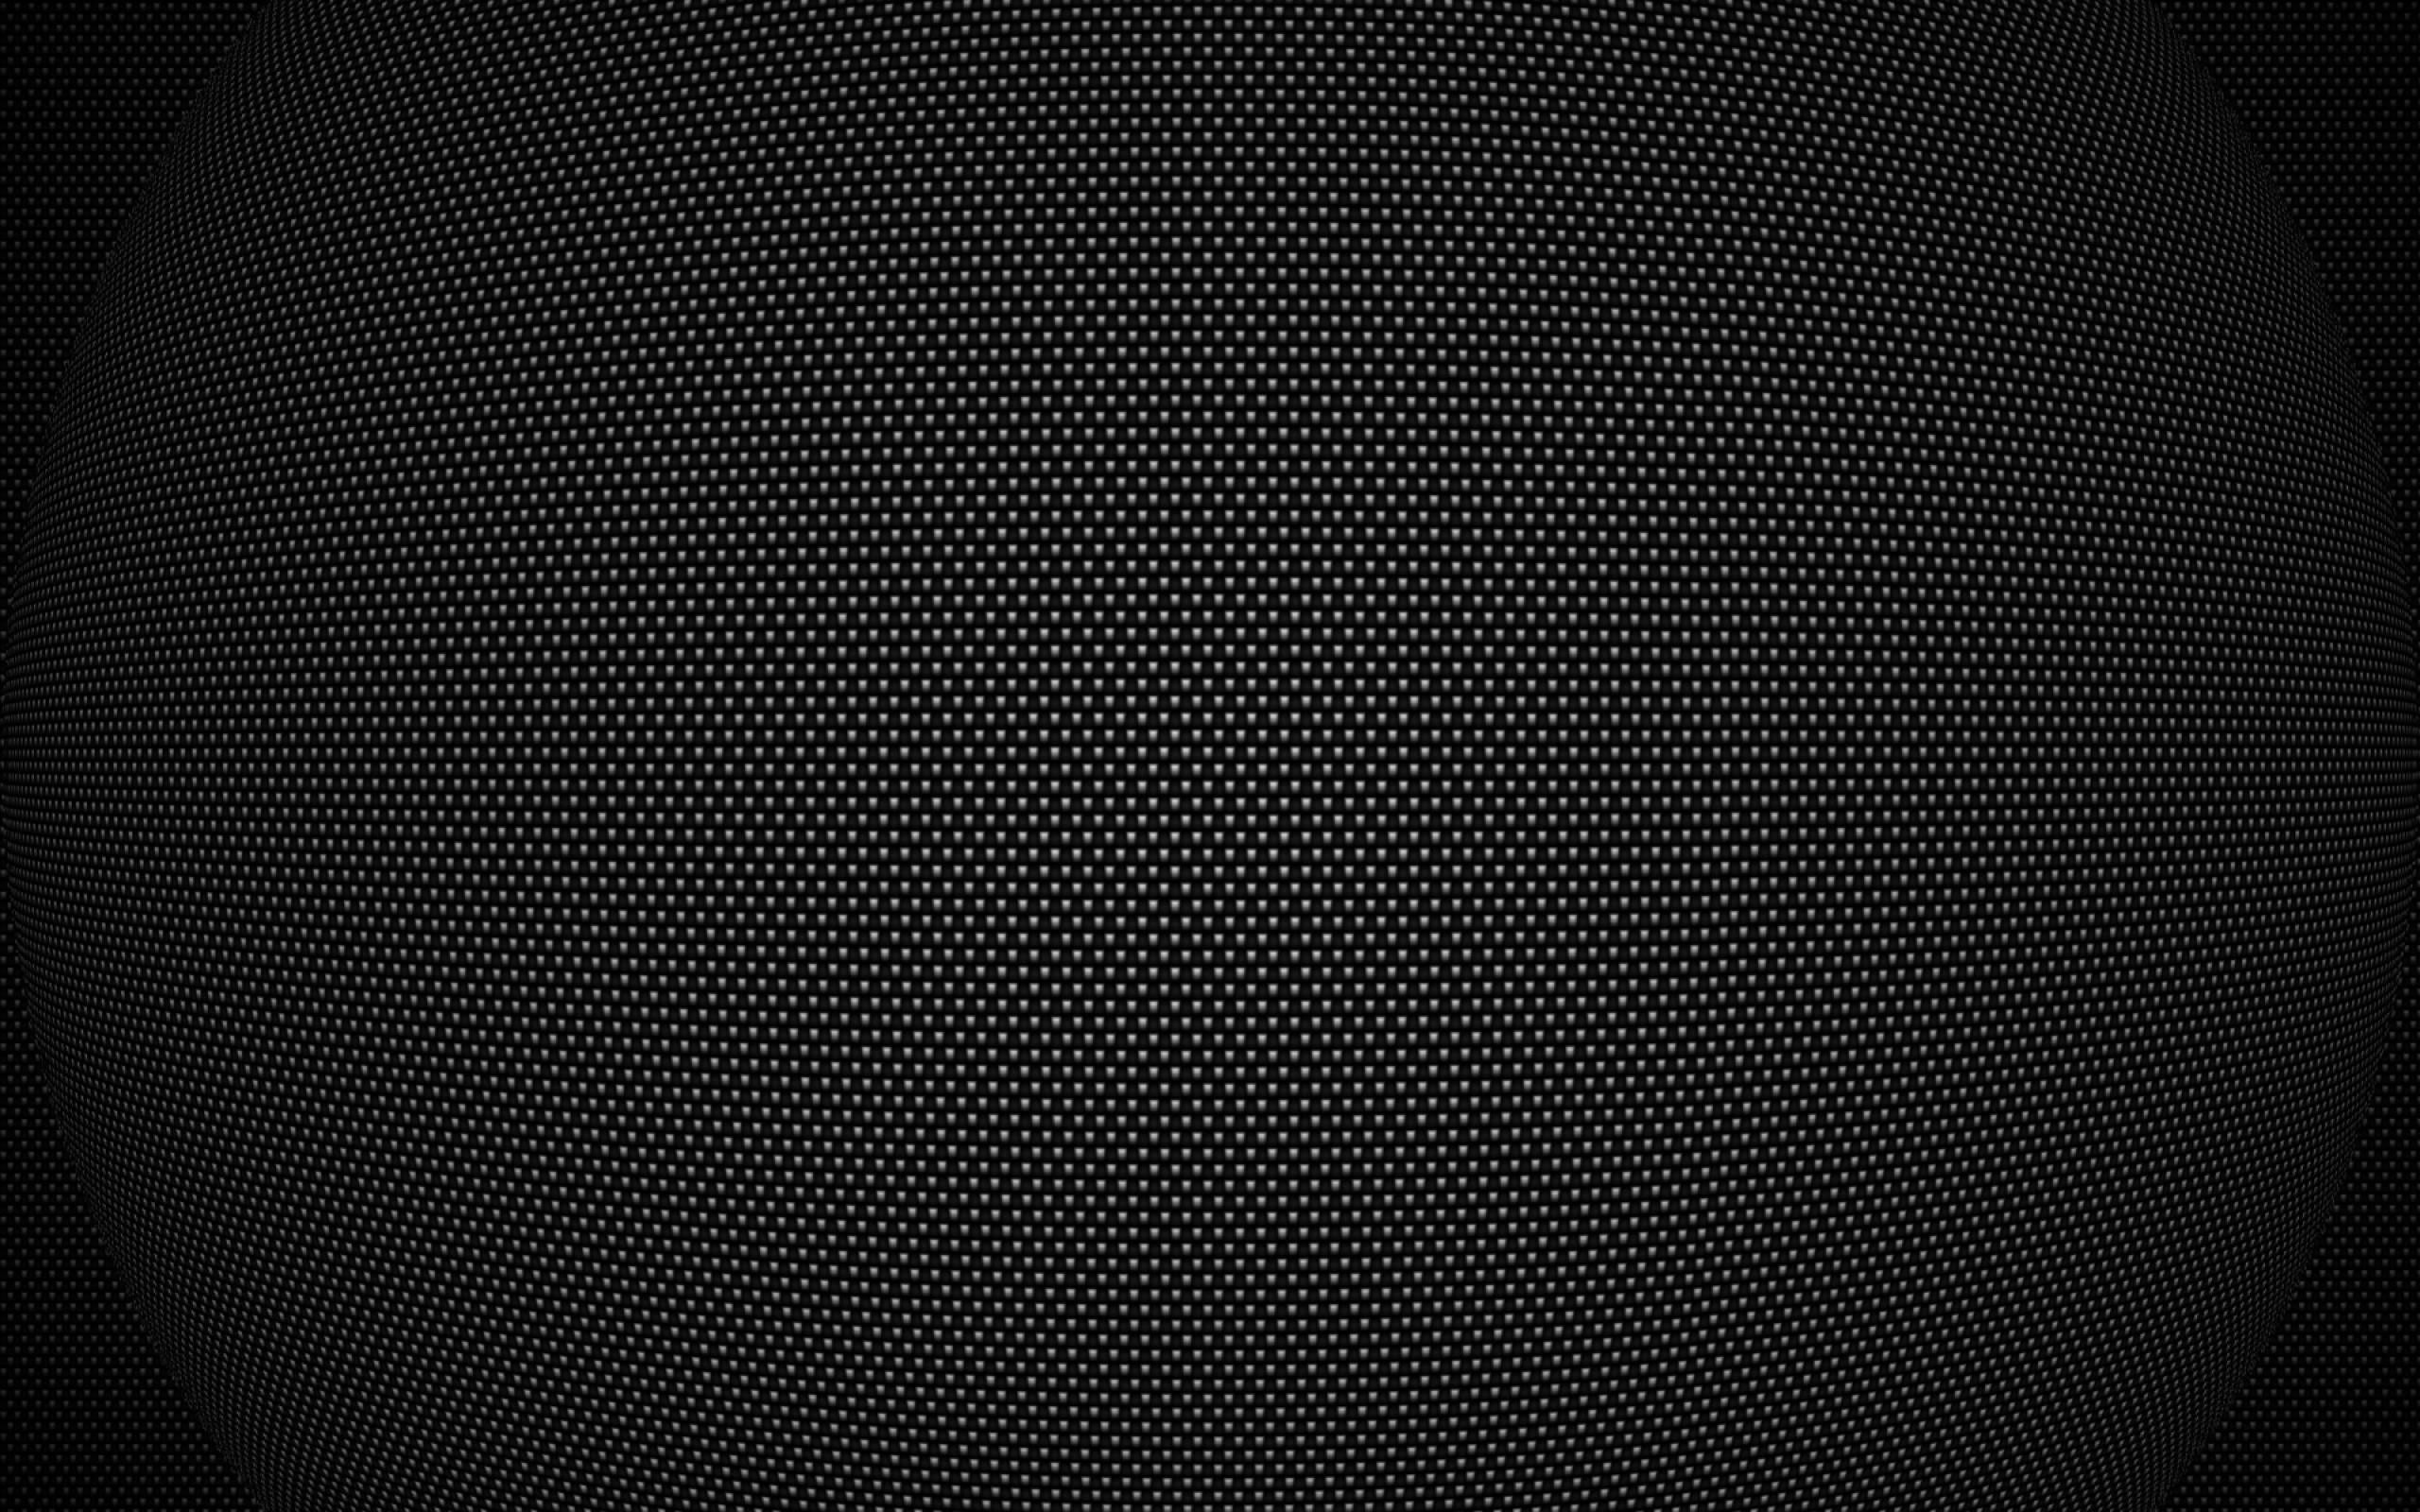  Black  Textured background    Download free amazing full HD 